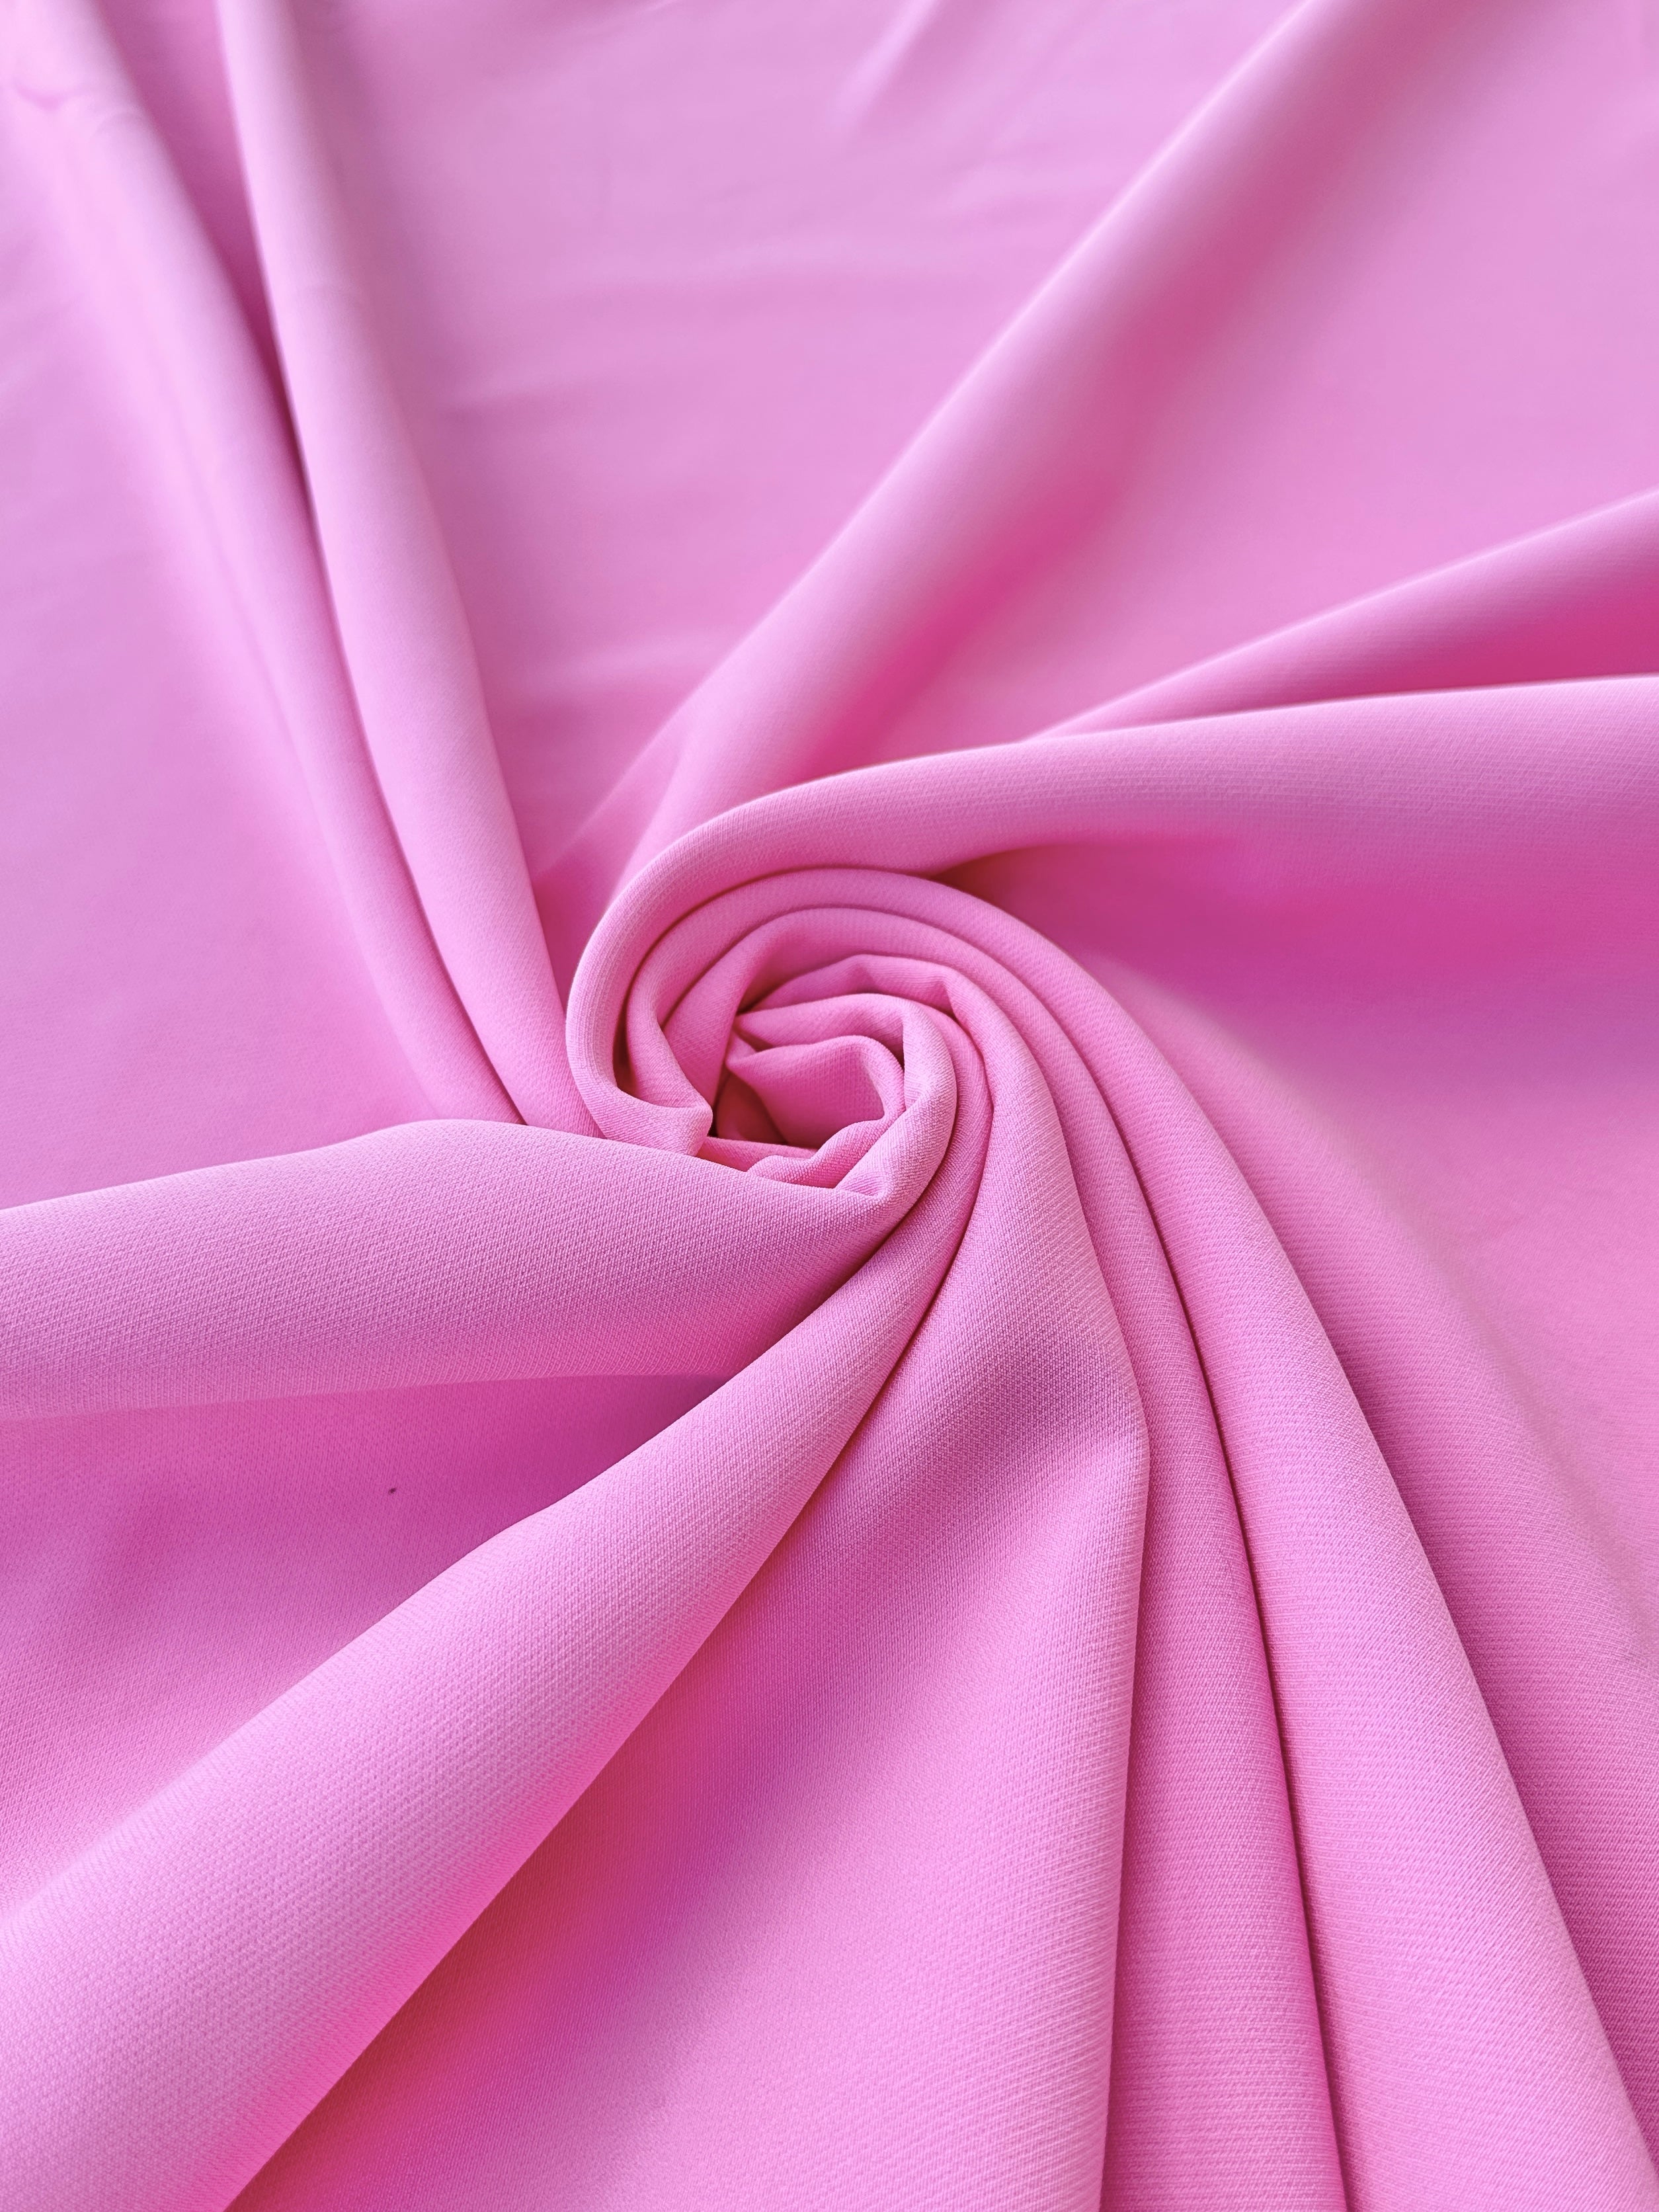 crepe and gabardine, Baby Pink Stretch Crepe Fabric, Princess Pink Moss Crepe Fabric By yard, Pink 4ply crepe, Baby Pink Spandex Fabric, Baby Pink Stretch Twill, gabardine for woman, fabric on sale, discounted fabric, gabardine on sale, buy fabric online